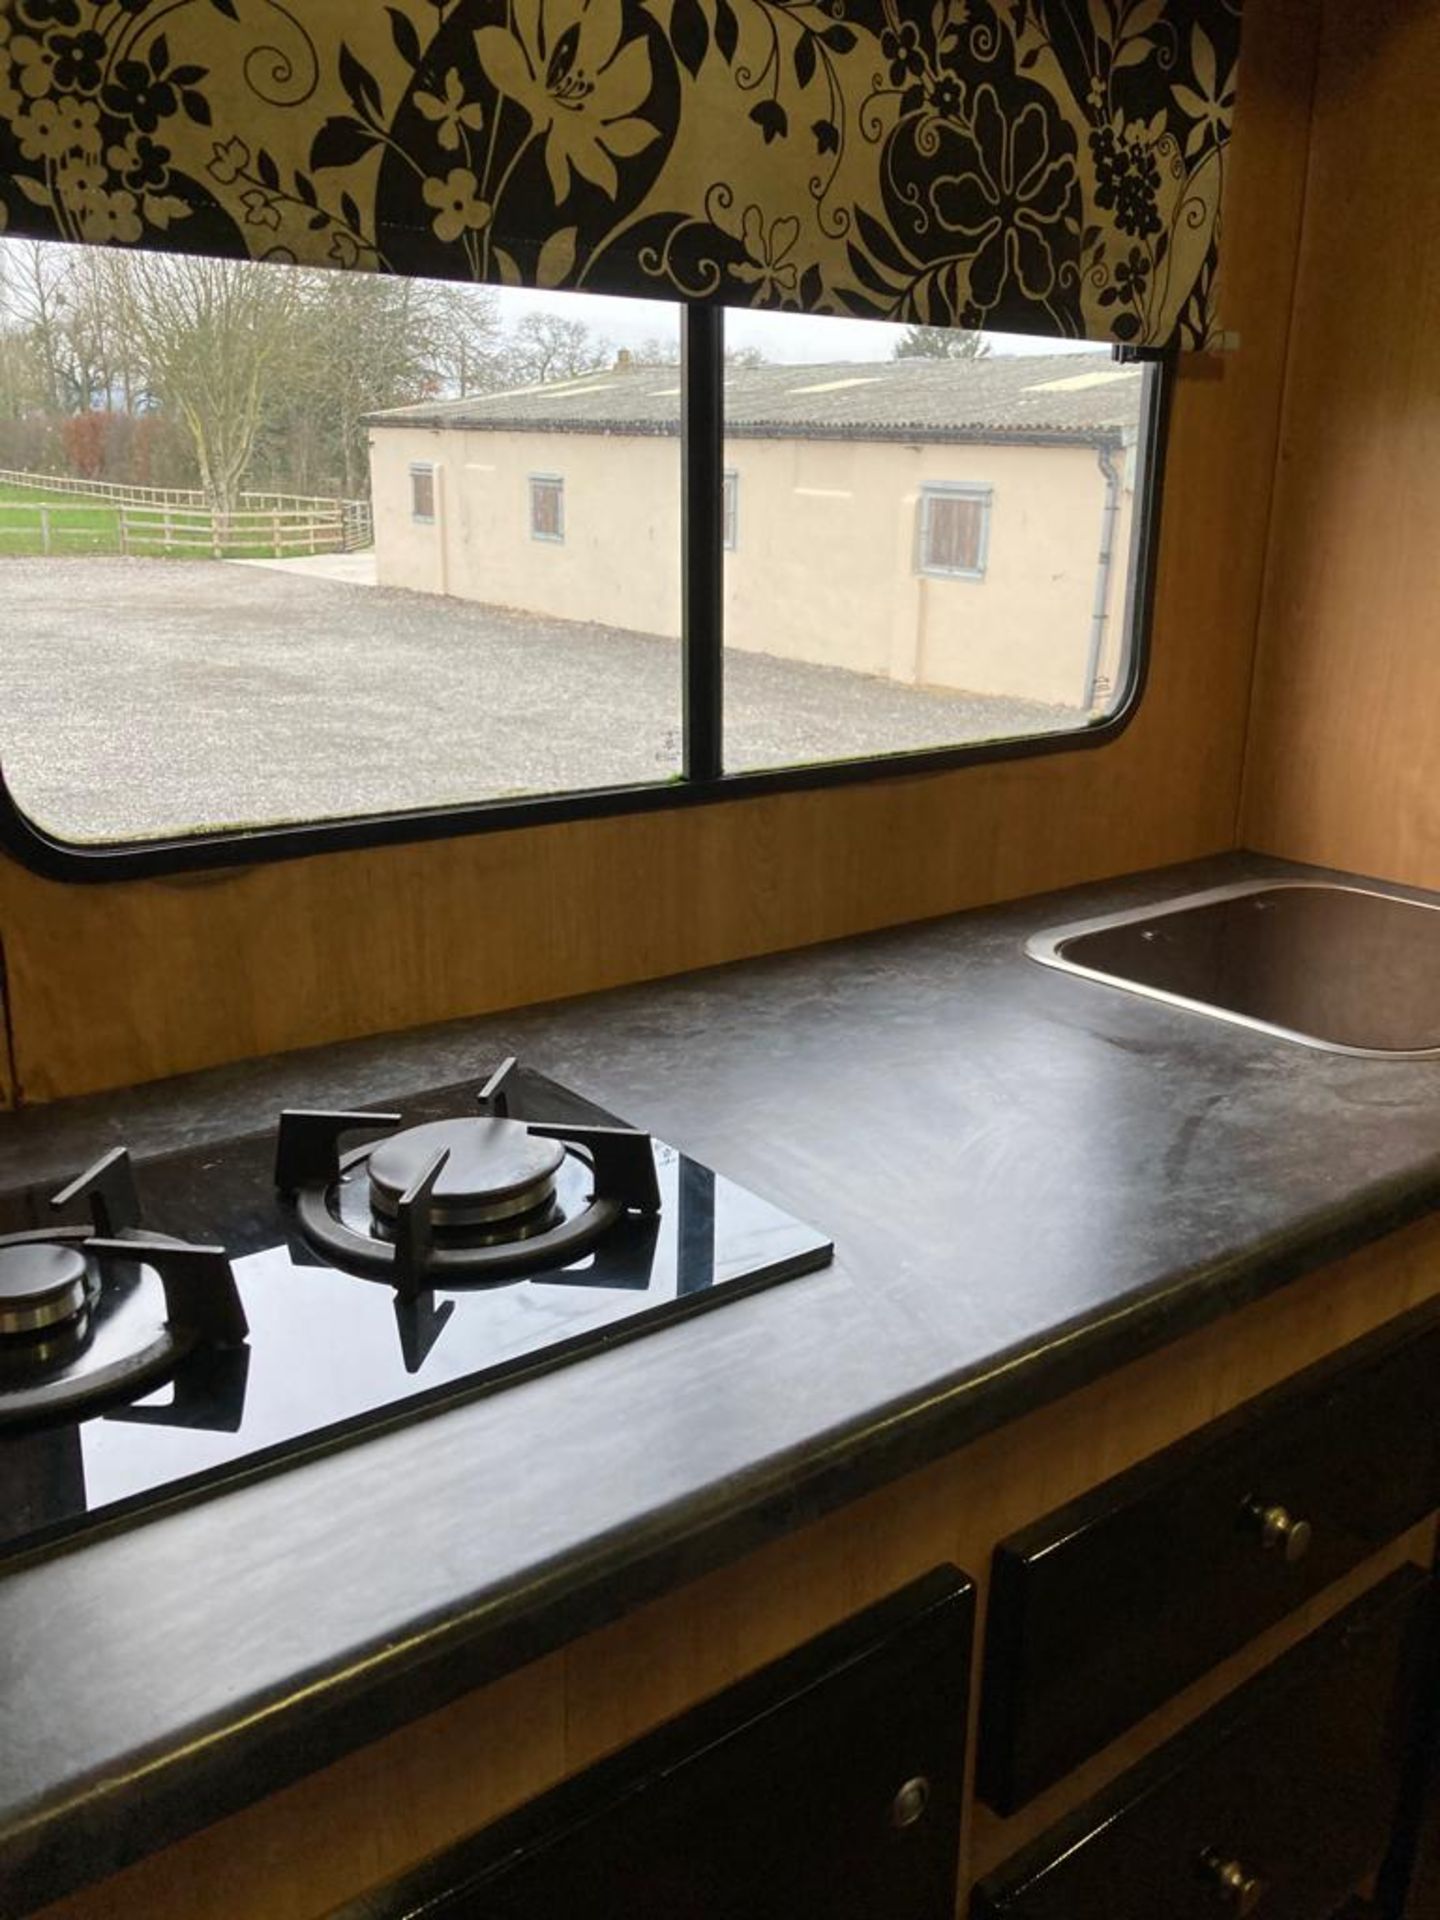 RESERVE LOWERED! HORSE BOX / ACCOMODATION, SPACE FOR 3 PONIES OR 2 HORSES (MAX HEIGHT 17 HANDS) - Image 25 of 33